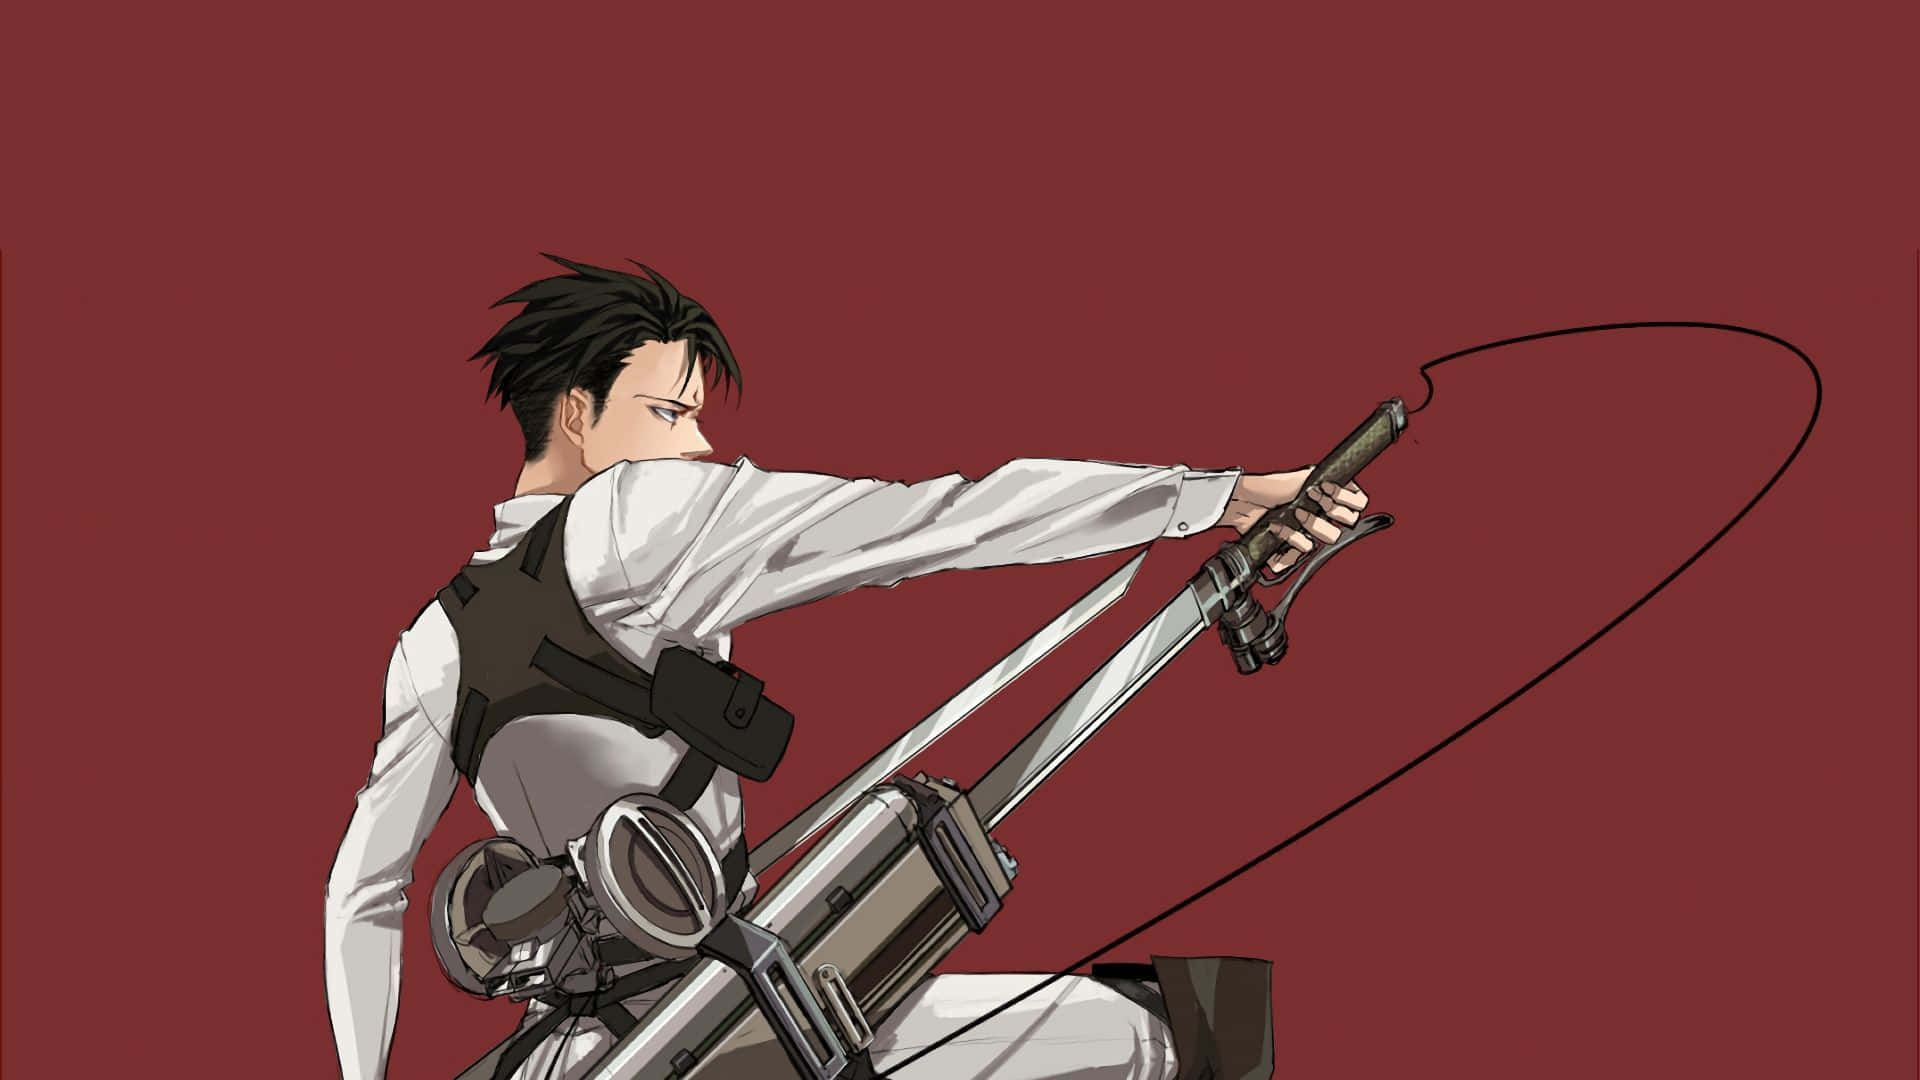 Levi Ackerman of the Survey Corps valiantly defending humanity against the Titans Wallpaper